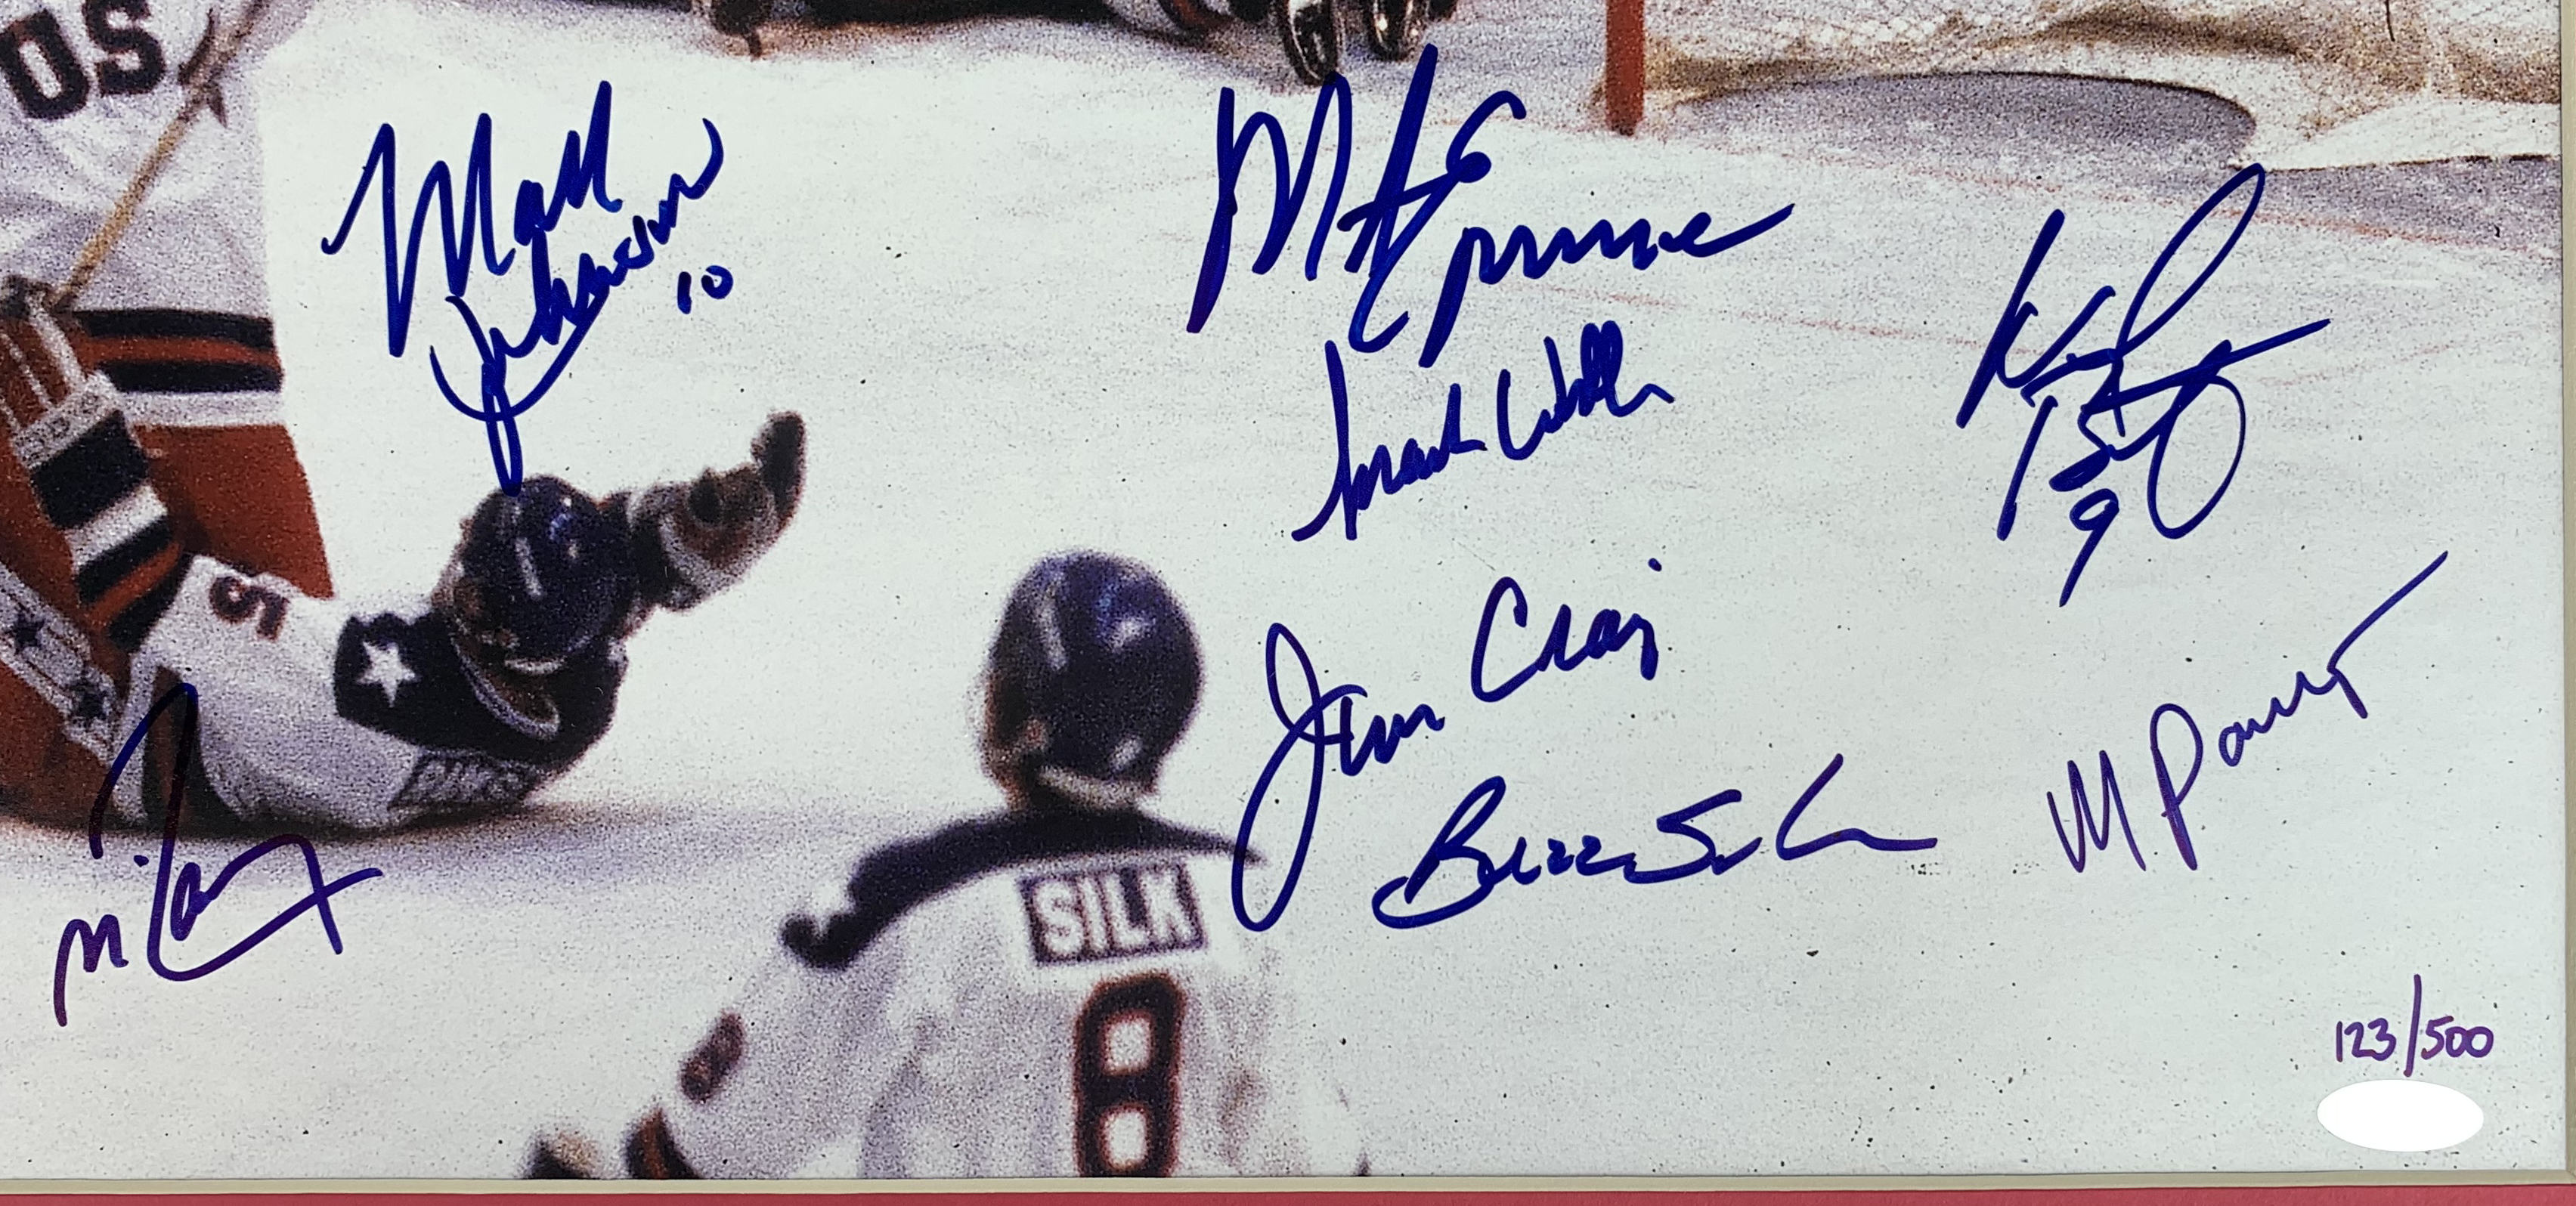 NEAL BROTEN 1980 USA OLYMPIC ICE HOCKEY MIRACLE ON ICE SIGNED AUTOGRAPHED  8X10